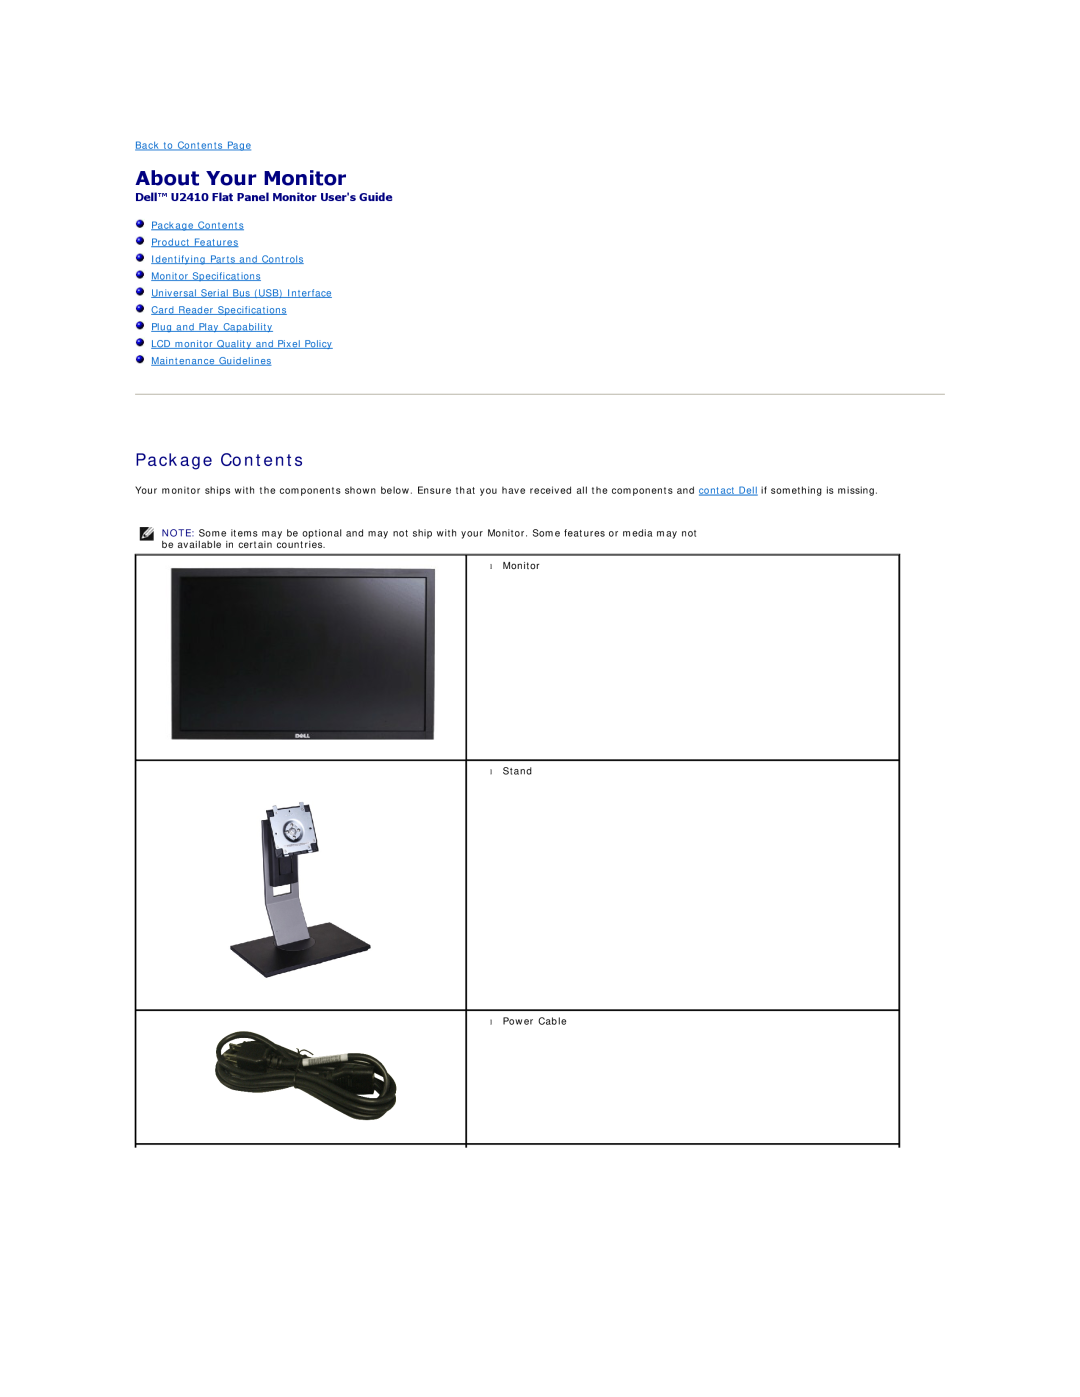 Dell 320-8277 manual About Your Monitor, Package Contents, Dell U2410 Flat Panel Monitor Users Guide, Back to Contents Page 